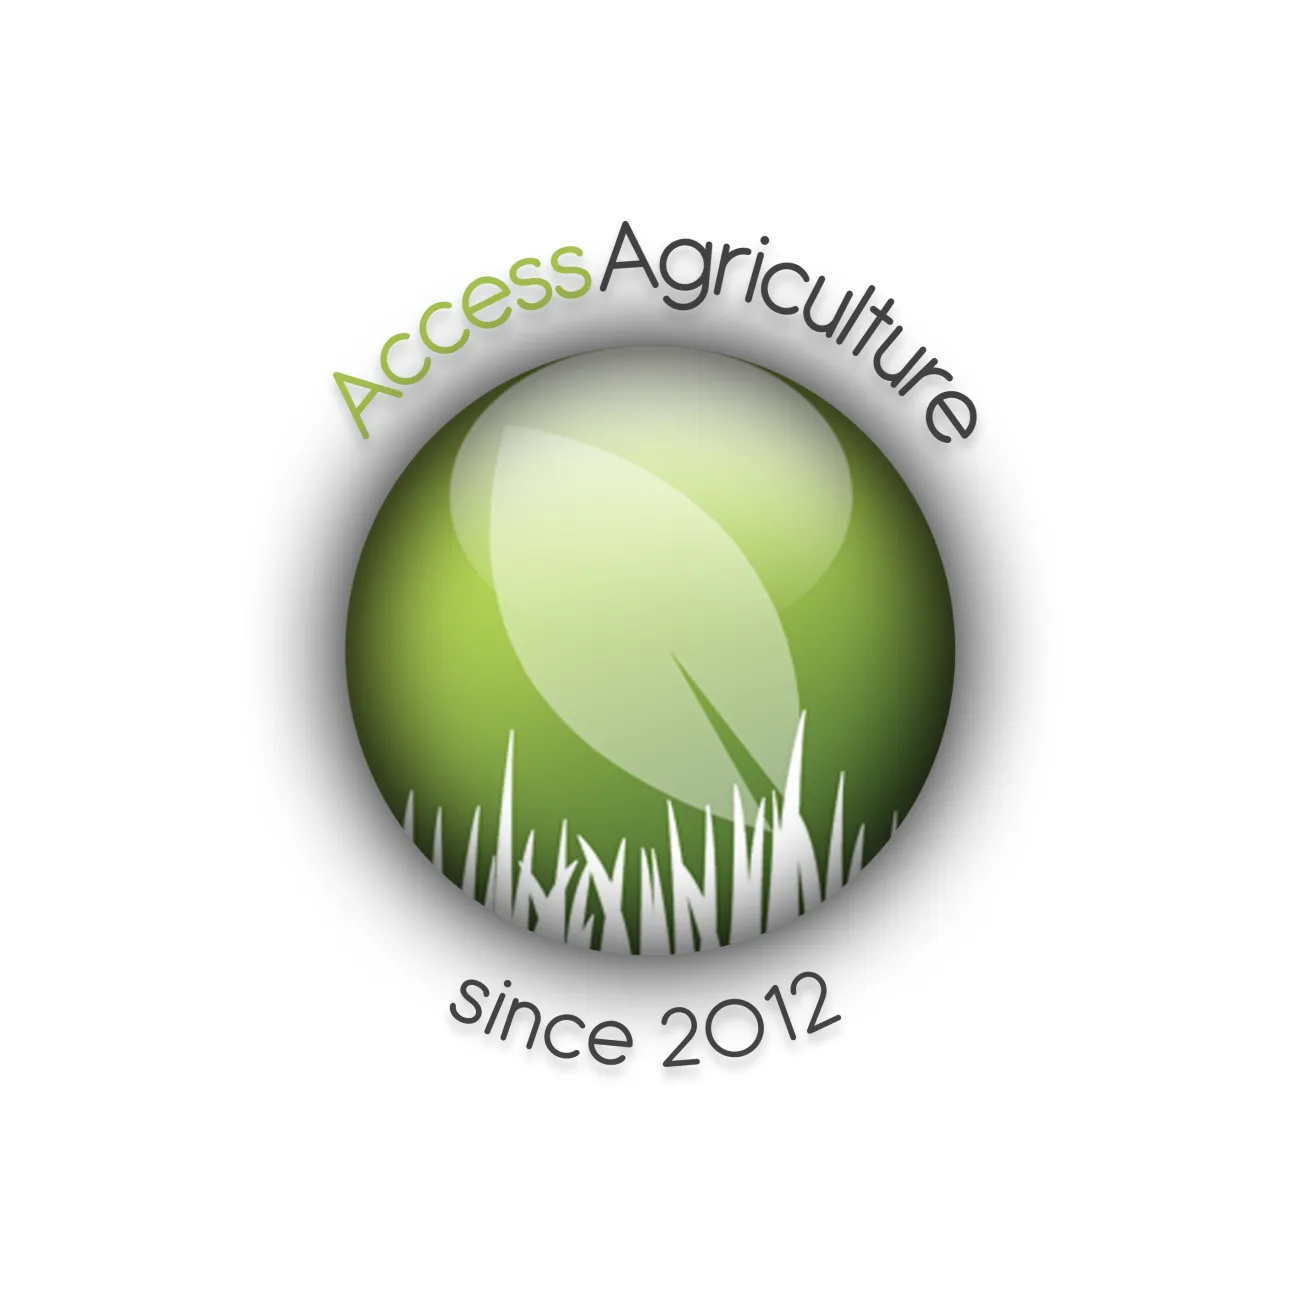 Access Agriculture since 2012